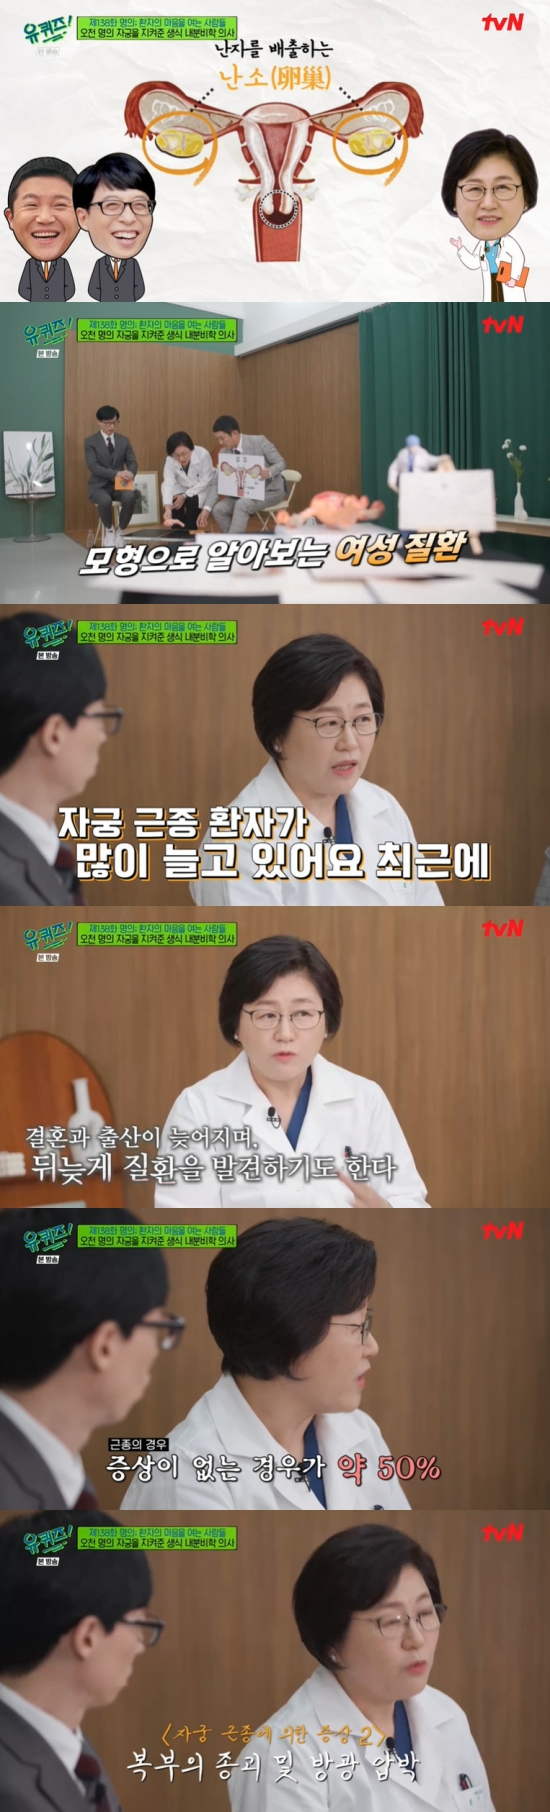 On TVN You Quiz on the Block (hereinafter referred to as Yu Quiz), which was broadcast on the 19th, the scene where Professor Kim Mi-ran appeared as a guest was broadcast while featured in The Name: People Opening the Heart of the Patient.Yoo Jae-Suk said, Both of them are men, so I was worried about what to do about the explanation today.Yoo Jae-Suk said, We also have to know these things through the professor because we have to go to the hospital if there is a job like Na Kyung-eun in the case of me because Yu Quiz is a program to listen to various people in various fields.Professor Kim Mi-ran explained the reproductive organs using the pictures and models prepared in advance, and said, The number of patients with uterine myoma is increasing.It seems that menarche is getting faster and exposure to female hormones begins early. Professor Kim Mi-ran explained, Many women are married late, have late births, and when they try to give birth, they have been tested for marriage.The problem is that there are about 50% of cases without symptoms. They say that the tummy has come out. It is quite big enough to touch a large myoma, Kim said.Yoo Jae-Suk wondered, What symptoms are there? Professor Kim Mi-ran said, It can cause excessive menstruation or menstrual pain.If this grows, I will often pee and if it gets too big, the boat will come out. Professor Kim Mi-ran said, Some people say that they learned later after dieting. If you do not do ultrasound, you can not know if there is a bump.If you are a college student, it would be nice to try it once during vacation. What happens when you pass without knowing these diseases, said Yoo Jae-Suk, who said, it causes infertility. Physiology is also enormous.I will just endure a lot of menstruation. Anemia is getting very severe. In particular, Yoo Jae-Suk asked, There was a belief that I decided when I chose obstetrics and gynecology. Professor Kim Mi-ran said, It was during the Internet.In the old days, I had a lot of babies. The Intern had babies. They were all sleeping at dawn.I had to give the baby to the nurse quickly and go back to the mother, but she didnt let me go.Since then, I have become a doctor, but I have a sincere idea that I will contribute to the health of women by protecting my precious womb. Photo = TVN broadcast screen